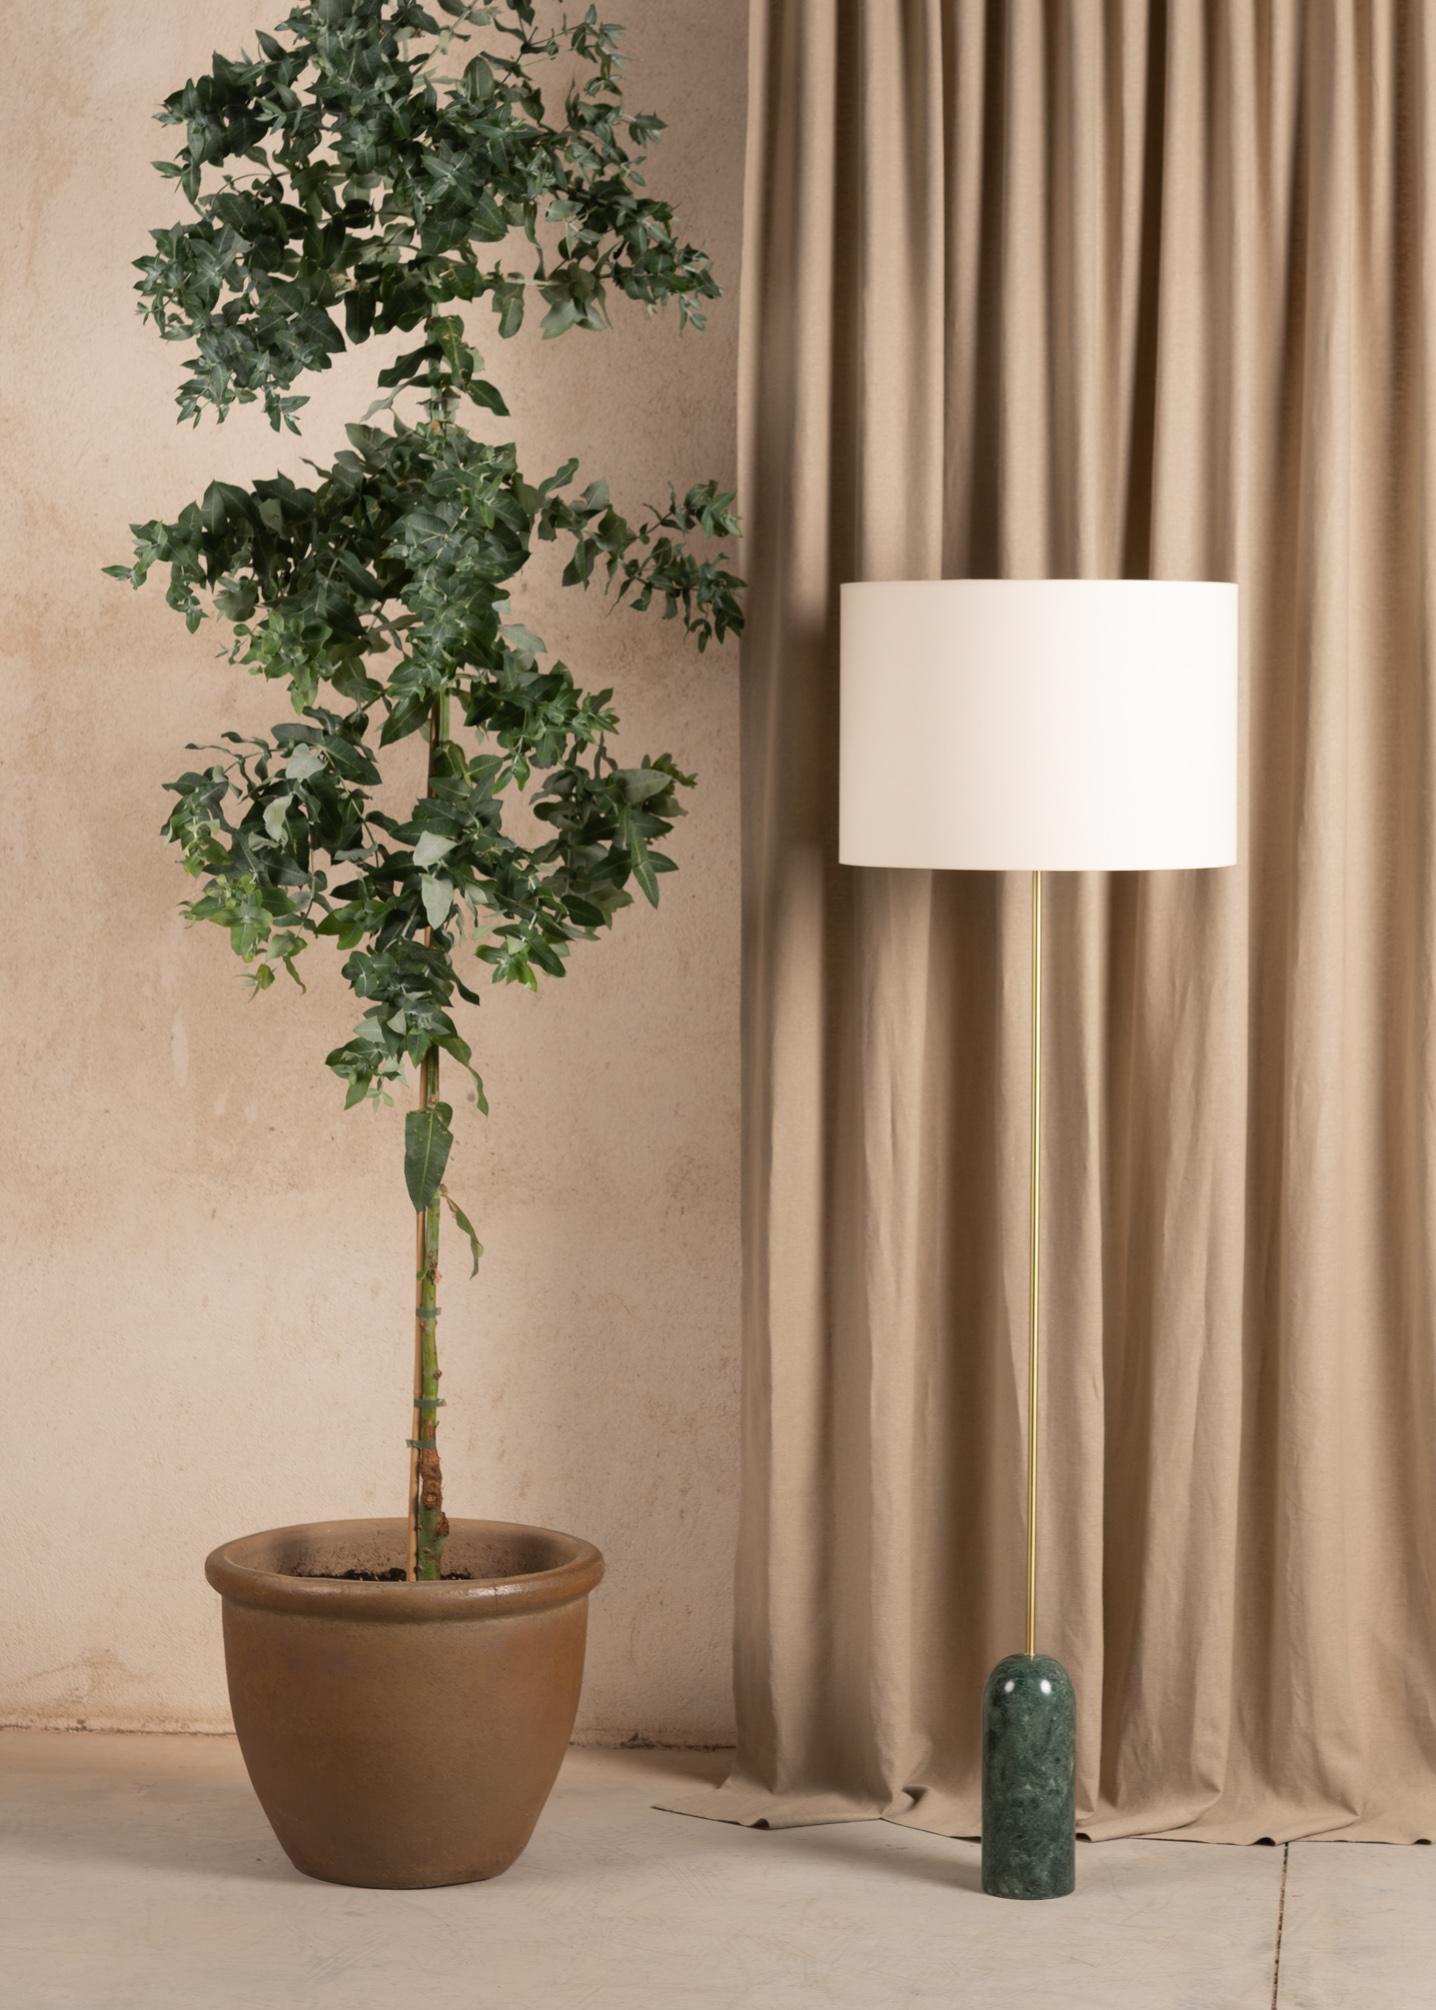 Pendolo Drum Green Marble Floor Lamp by Simone & Marcel
Dimensions: D 50 x W 50 x H 166 cm.
Materials: Brass, cotton and green marble.

Also available in different marble and alabaster options and finishes. Custom options available on request.